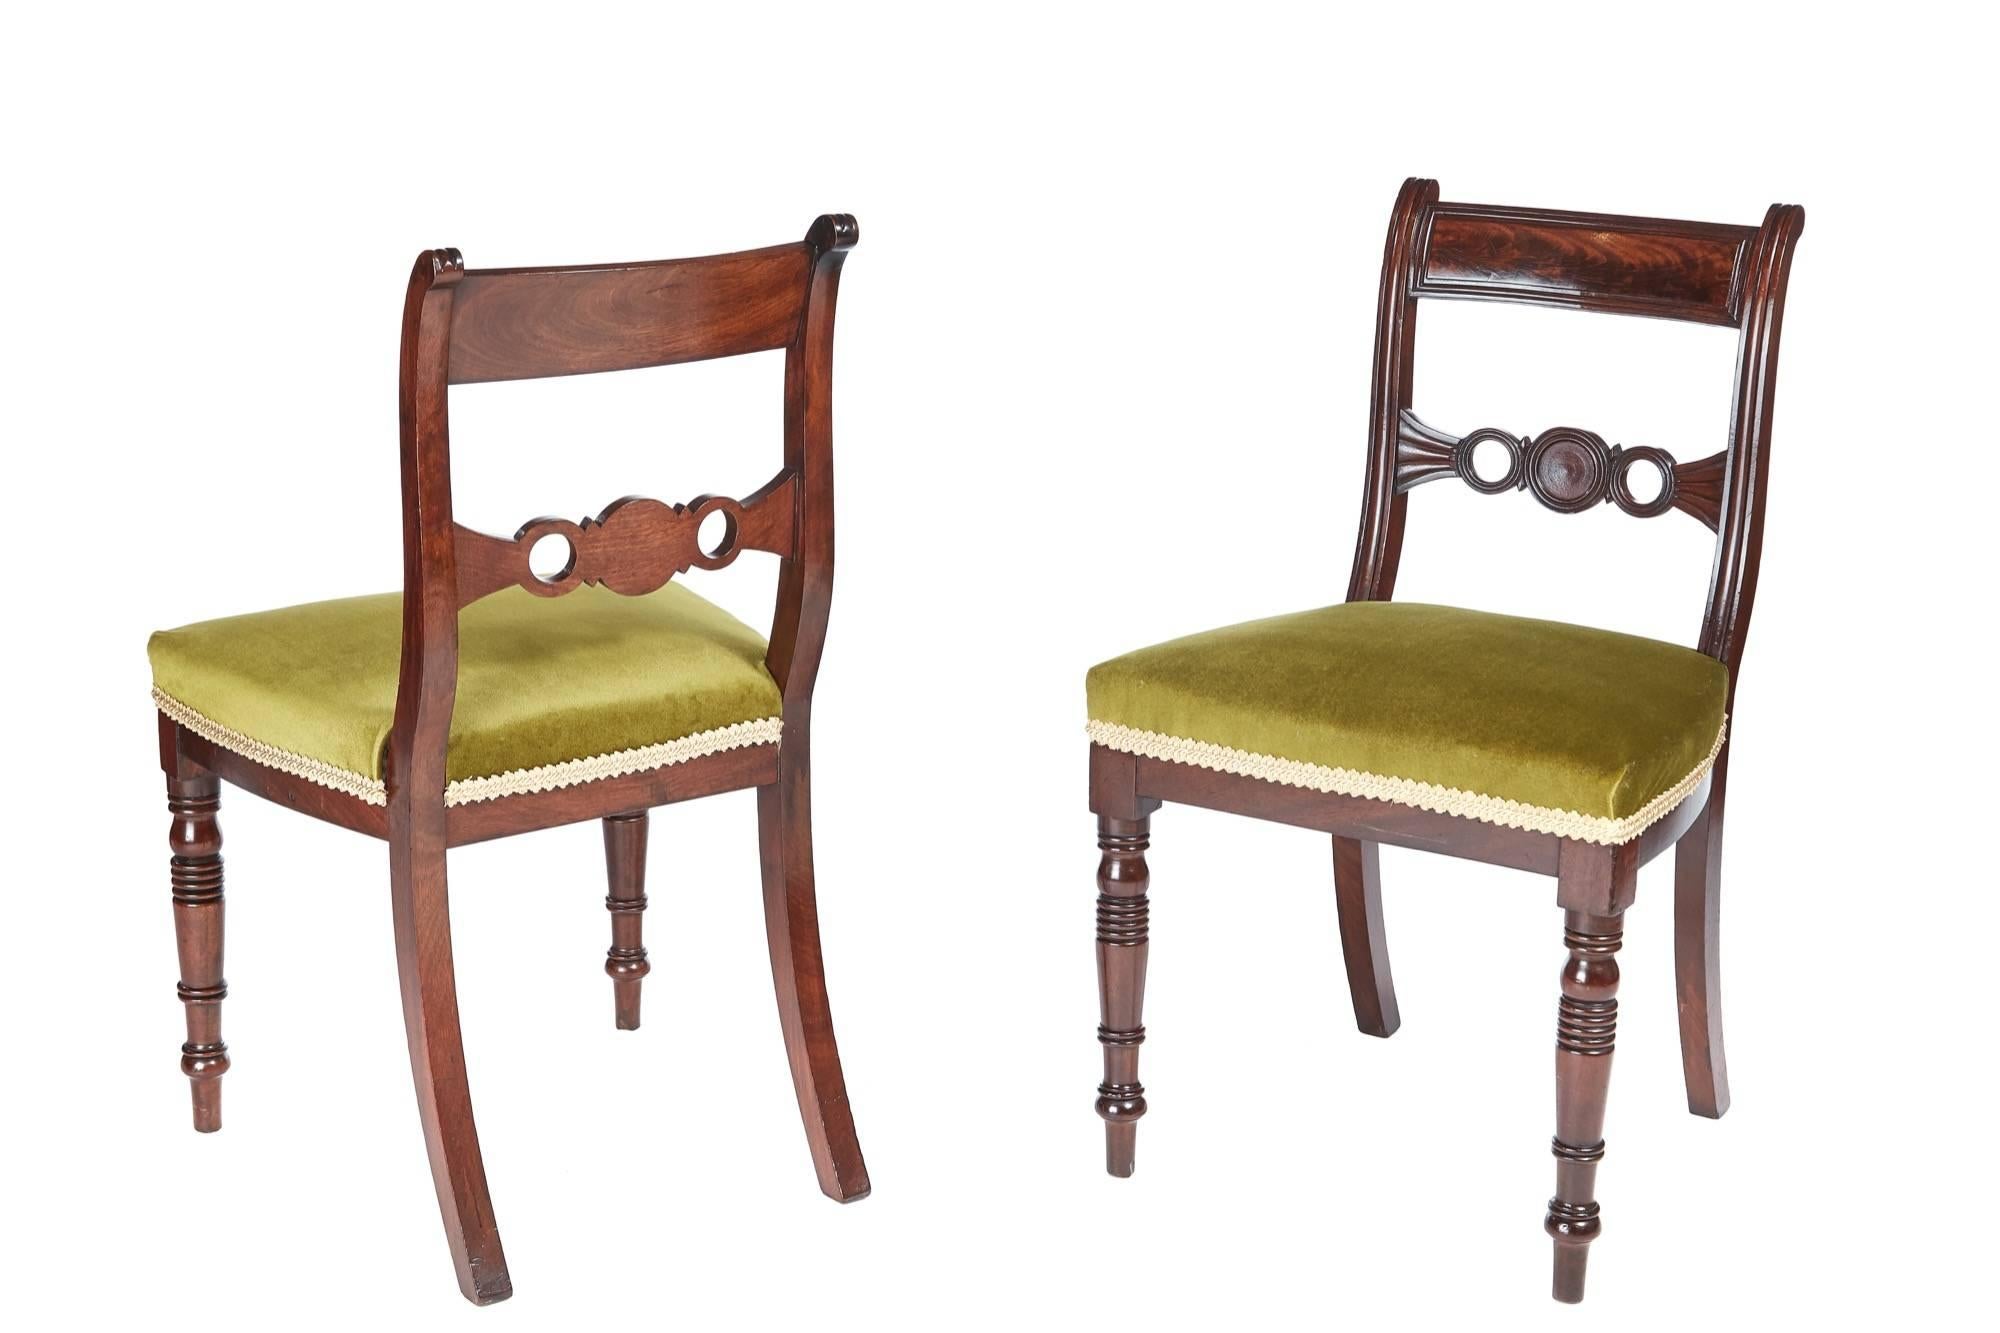 Fine set of six Regency mahogany dining chairs, with a shaped reeded top rail, shaped reeded centre splat, lovely turned legs to the front outswept back legs
Newly re-upholstered
Fantastic color and condition
Measures: 19